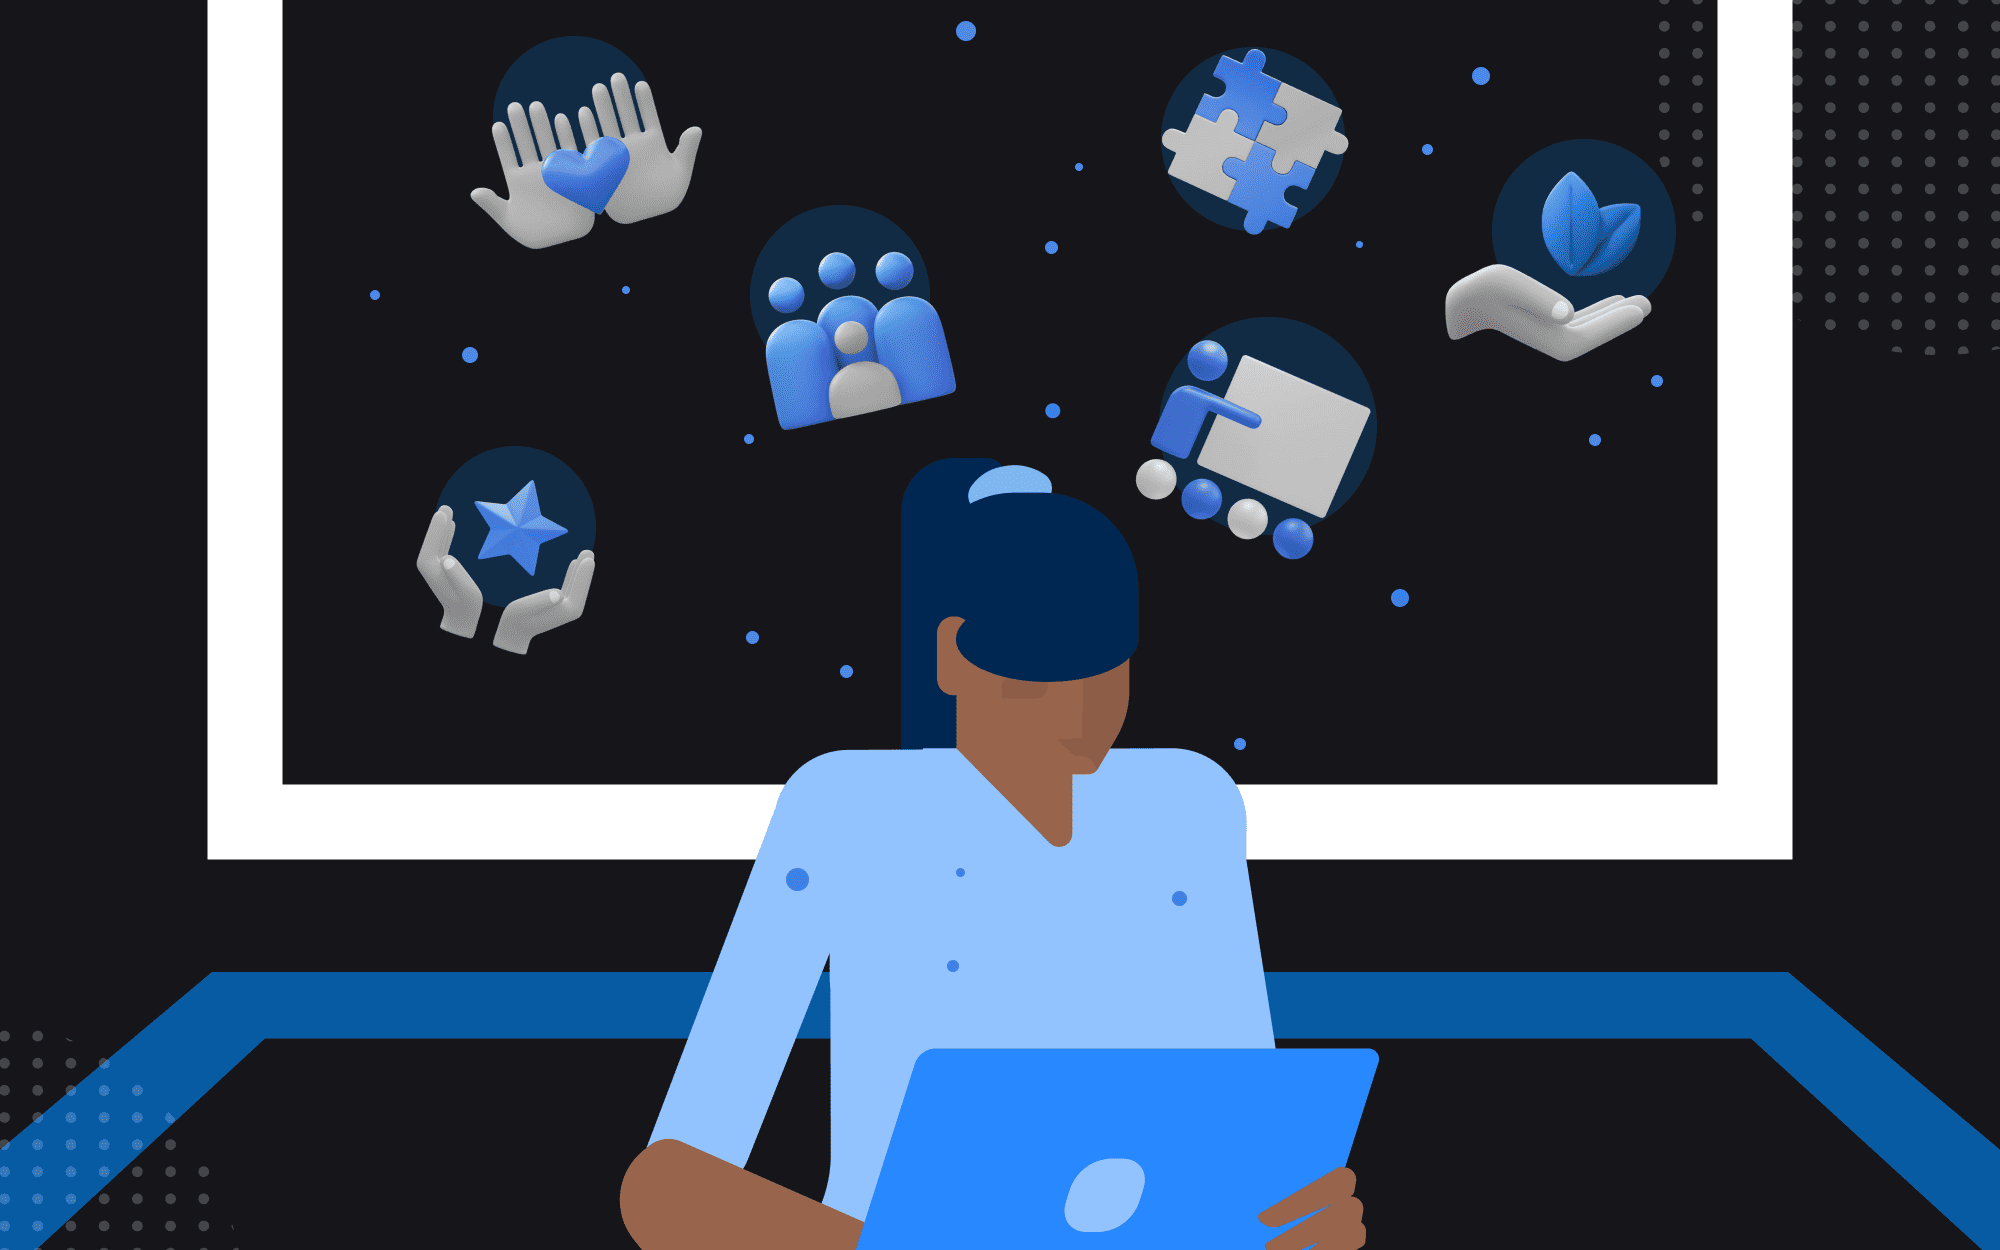 An illustration of a person sitting at a computer surrounded with floating icons that represent company values